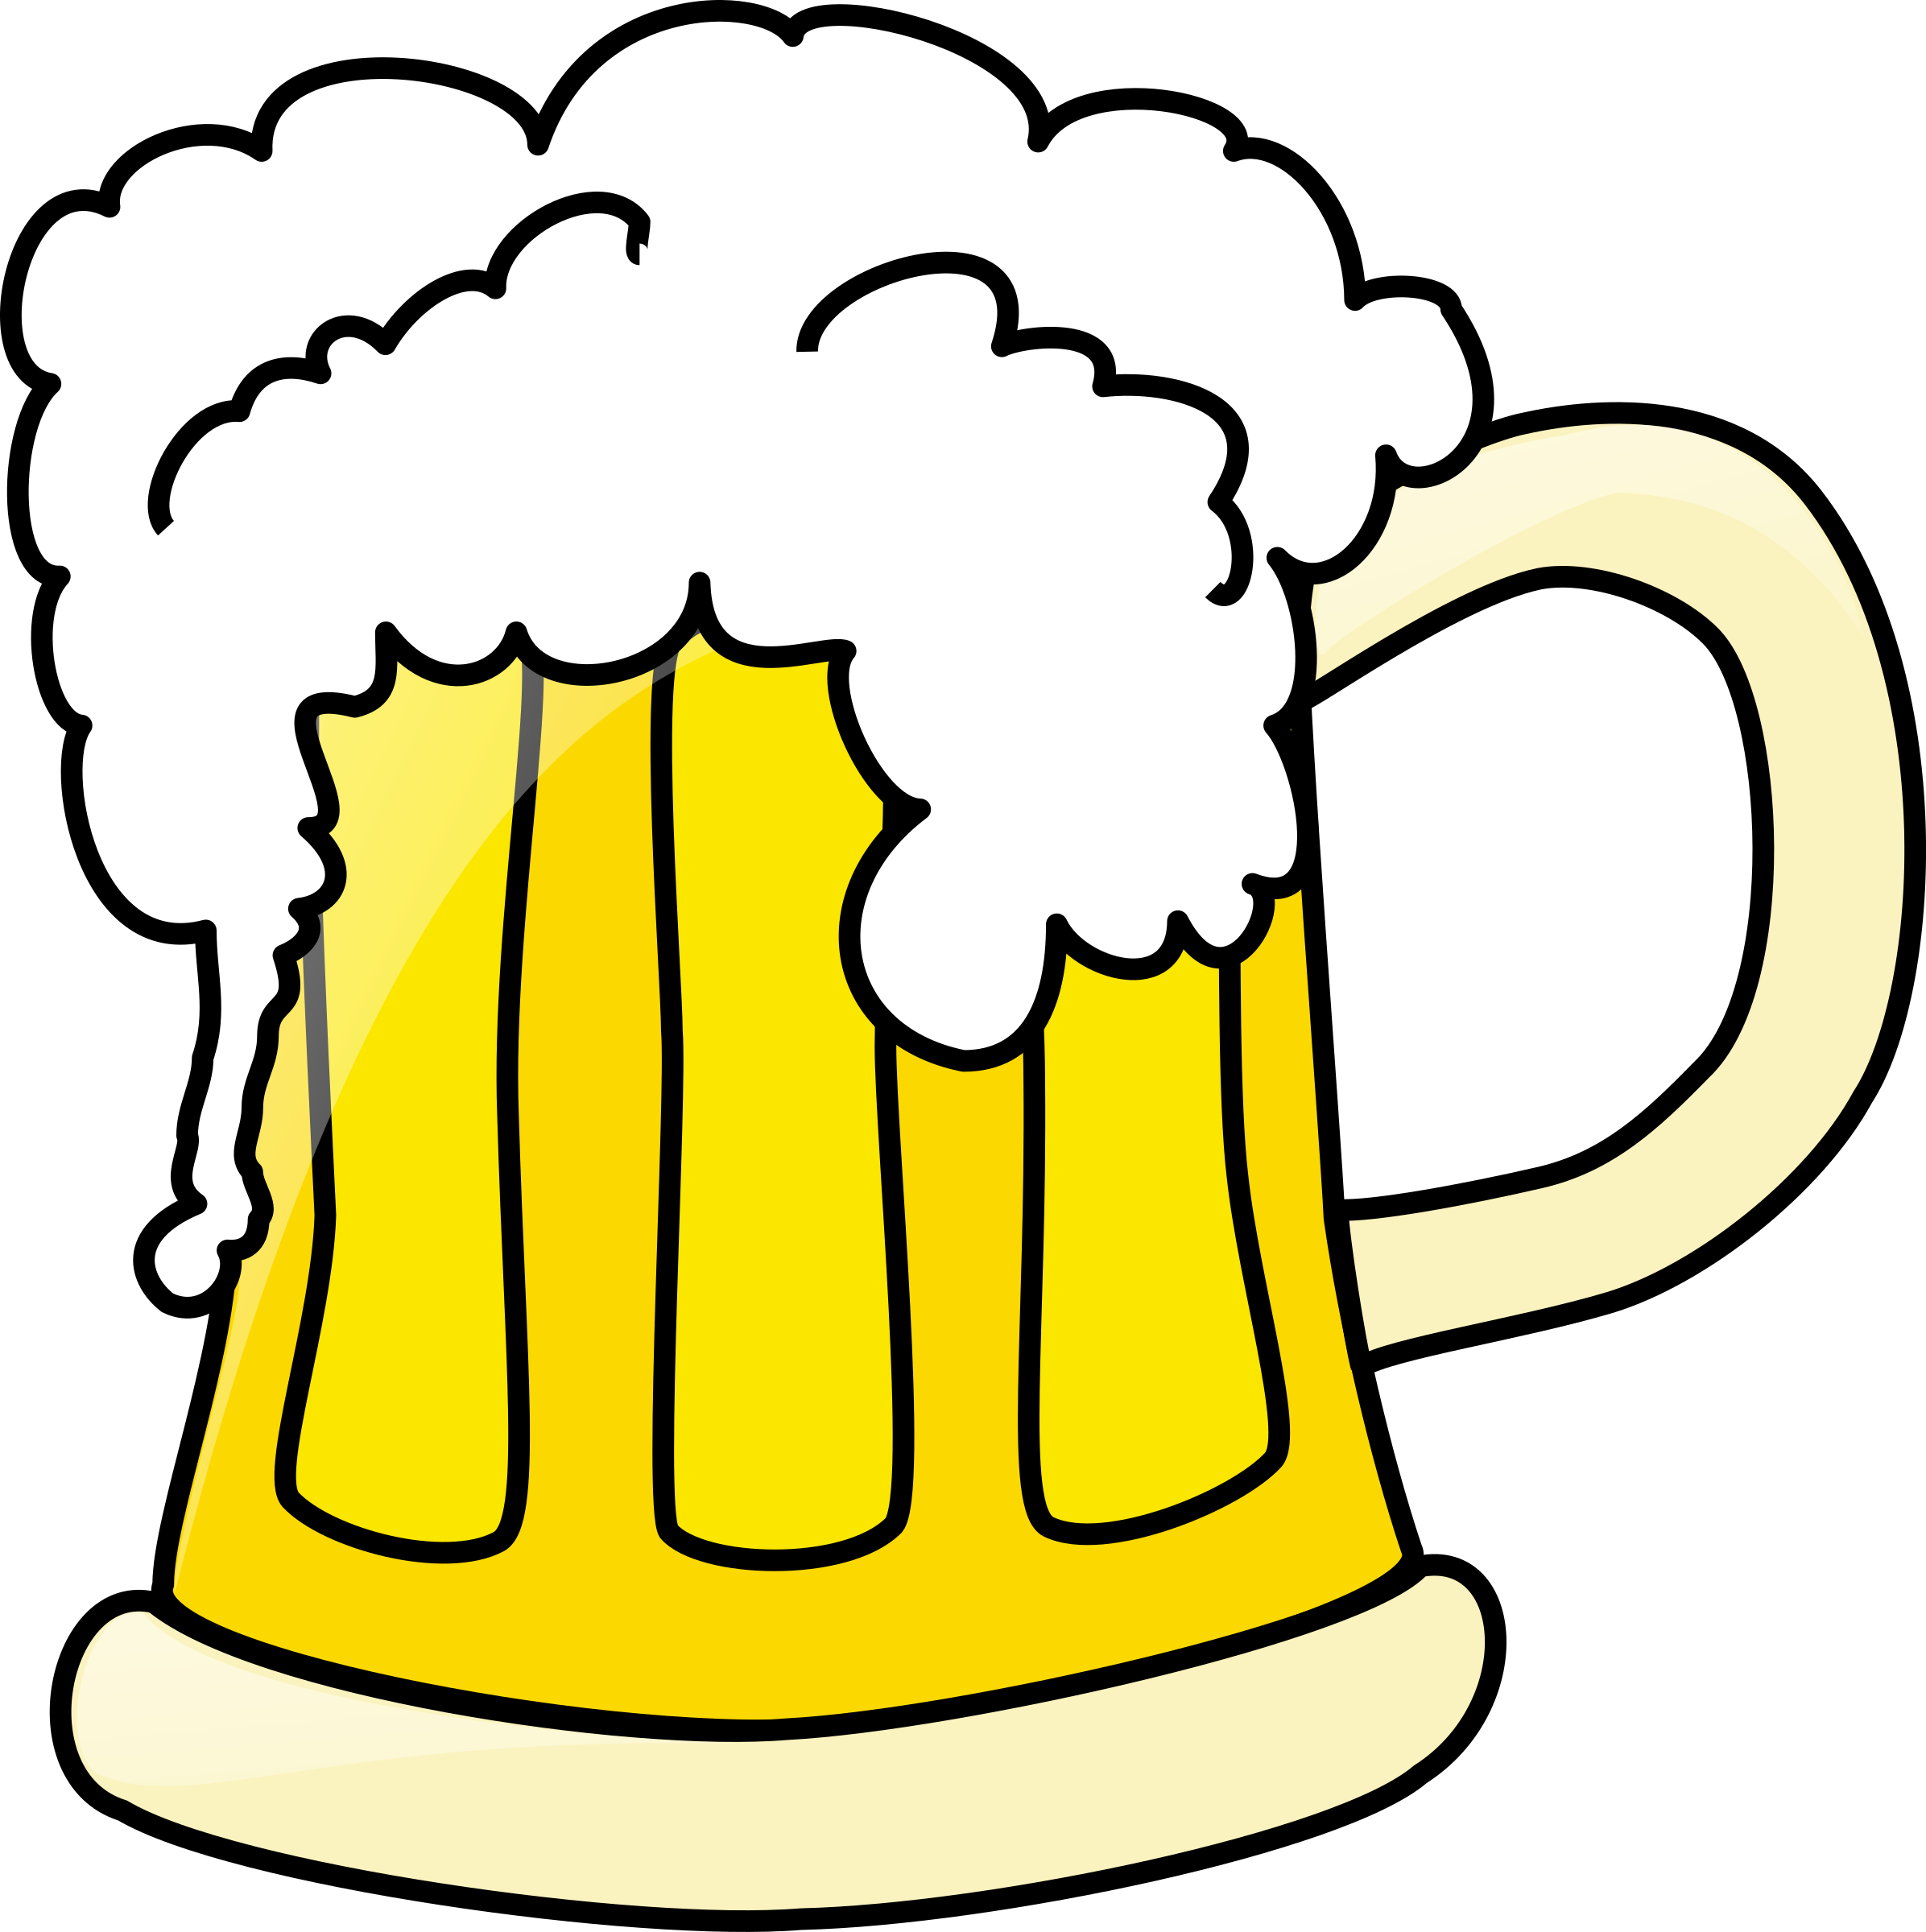 And Clipart Image Clipart Beer Mug Image - Beer Clip Art (2392x2400)